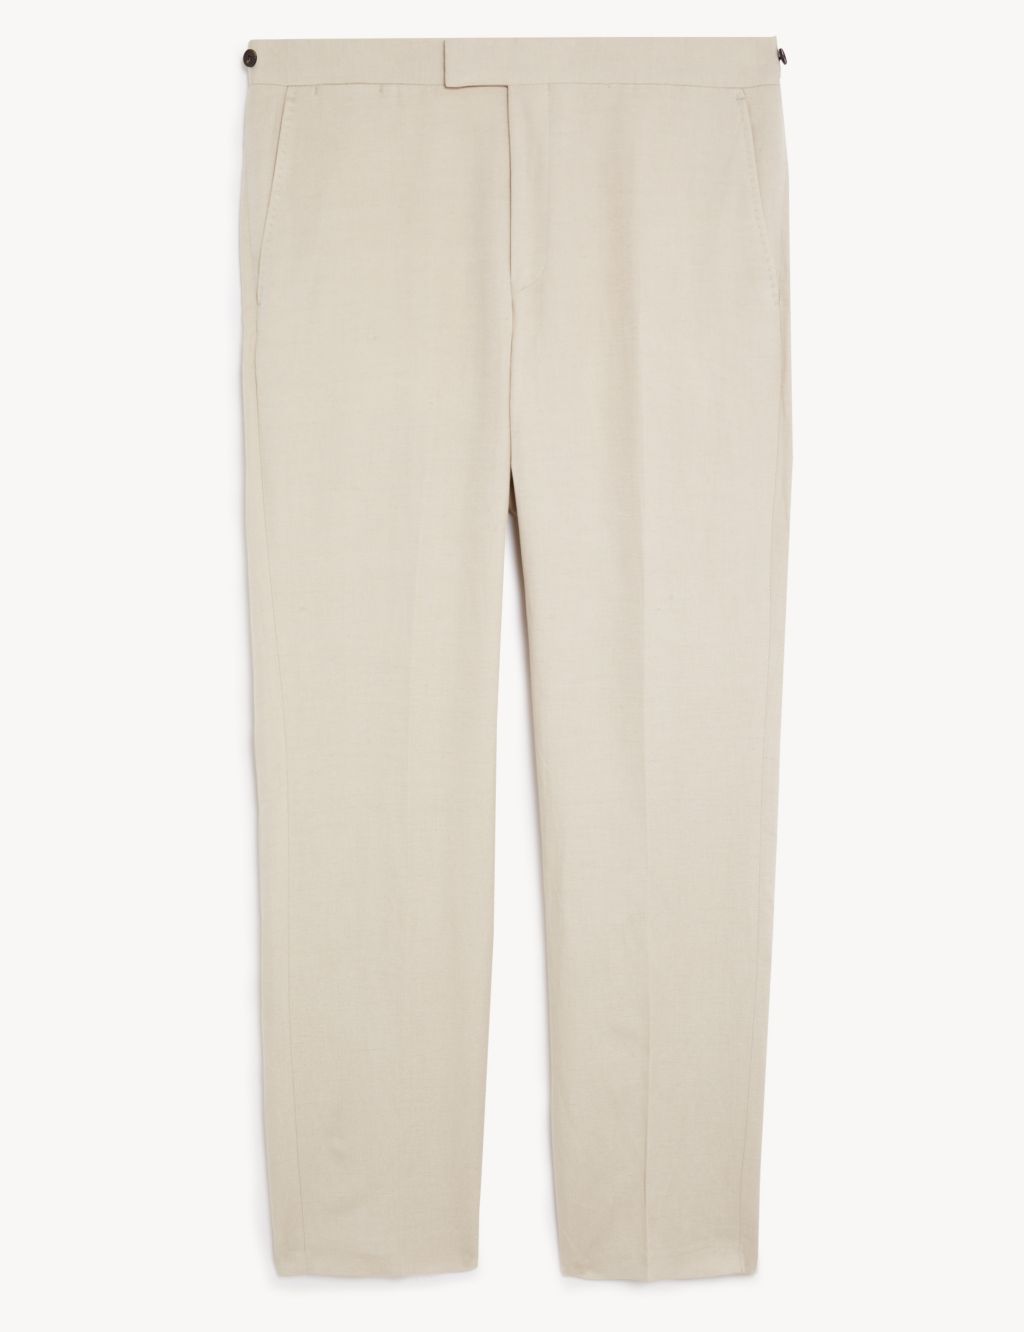 Tailored Fit Italian Silk And Linen Trousers image 2